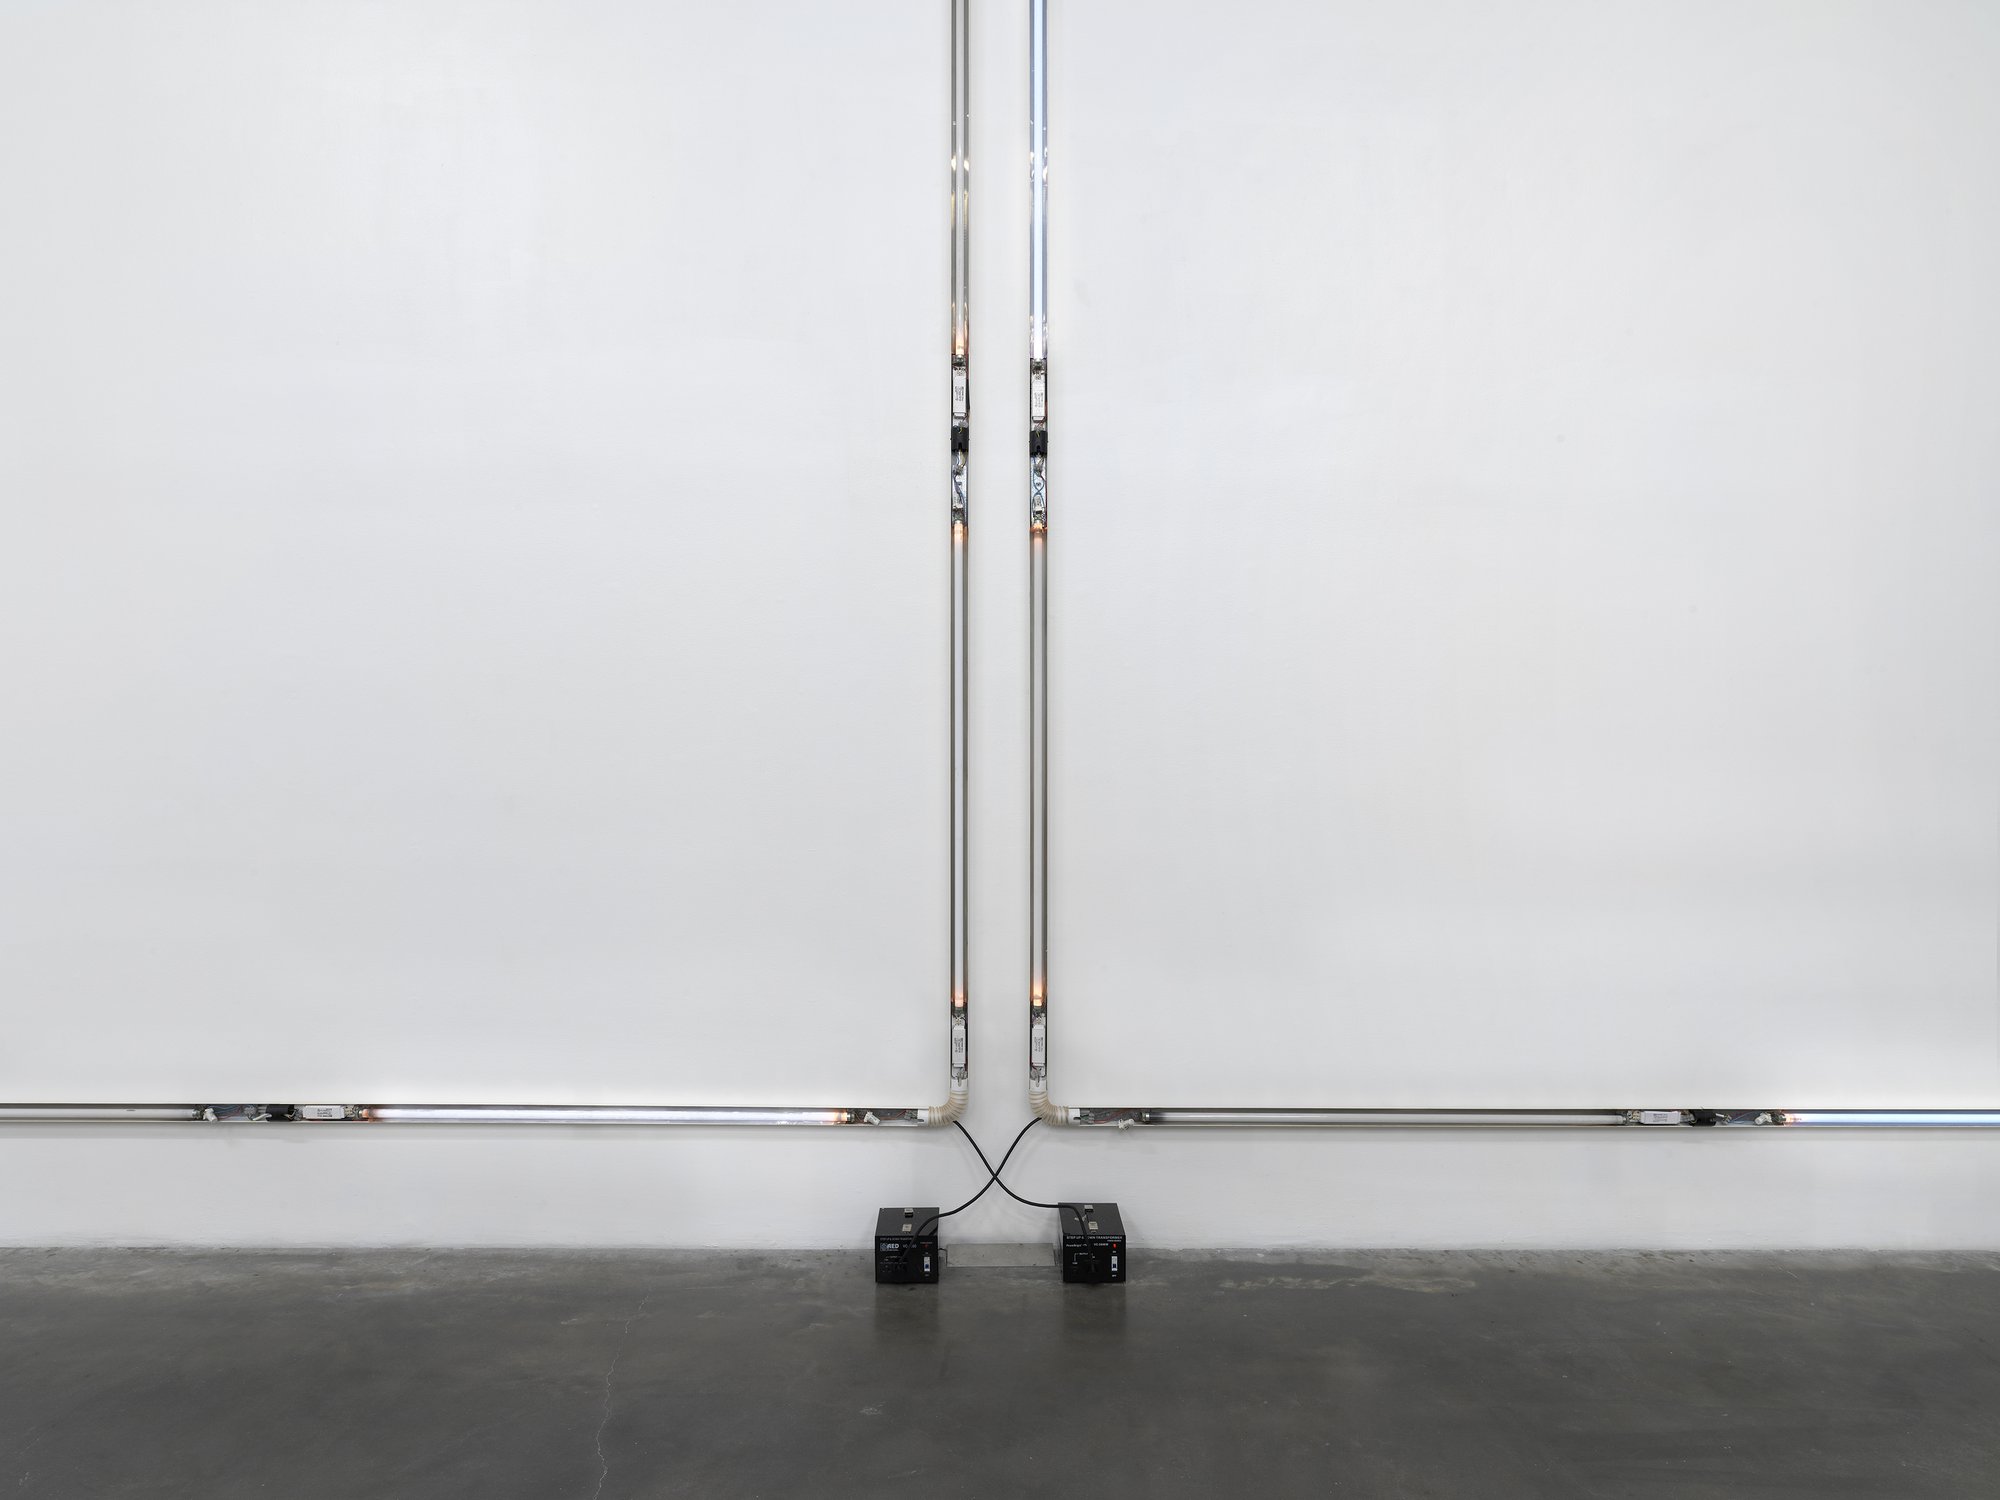 Iris Touliatou, Untitled (Still not over you), ceiling light fixtures, aluminium frame, fluorescents, wires, cable, transformers, 420 x 420 x 8 cm each, 2021. Installation view, New Museum Triennial, Soft Water Hard Stone, New Museum, New York, 2021